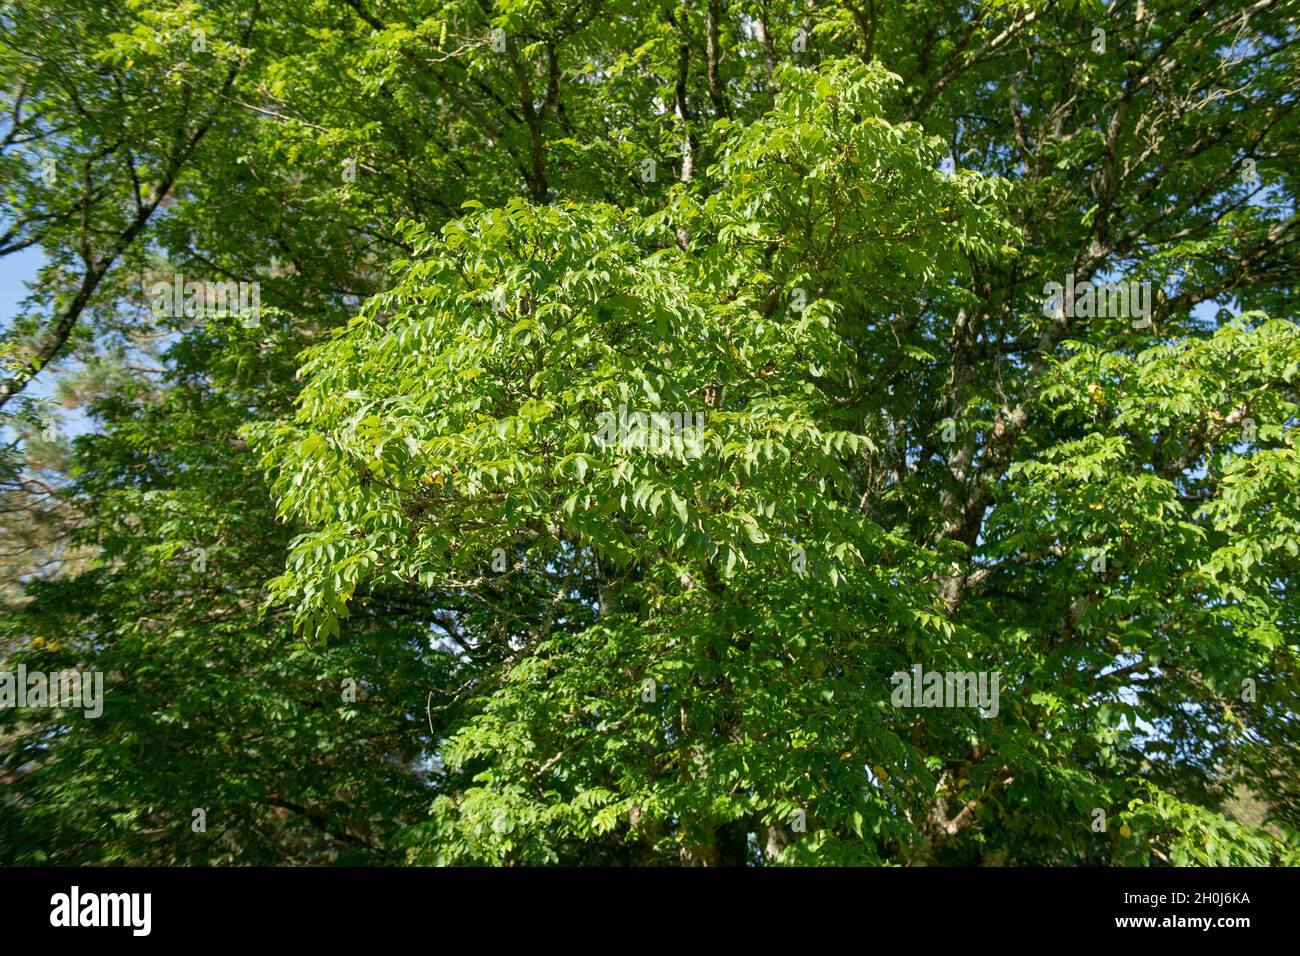 Lush Summer Green Leaves and Catkins of a Deciduous Caucasian Wingnut or Caucasian Walnut Tree (Pterocarya fraxinifolia) Growing in a Park Stock Photo